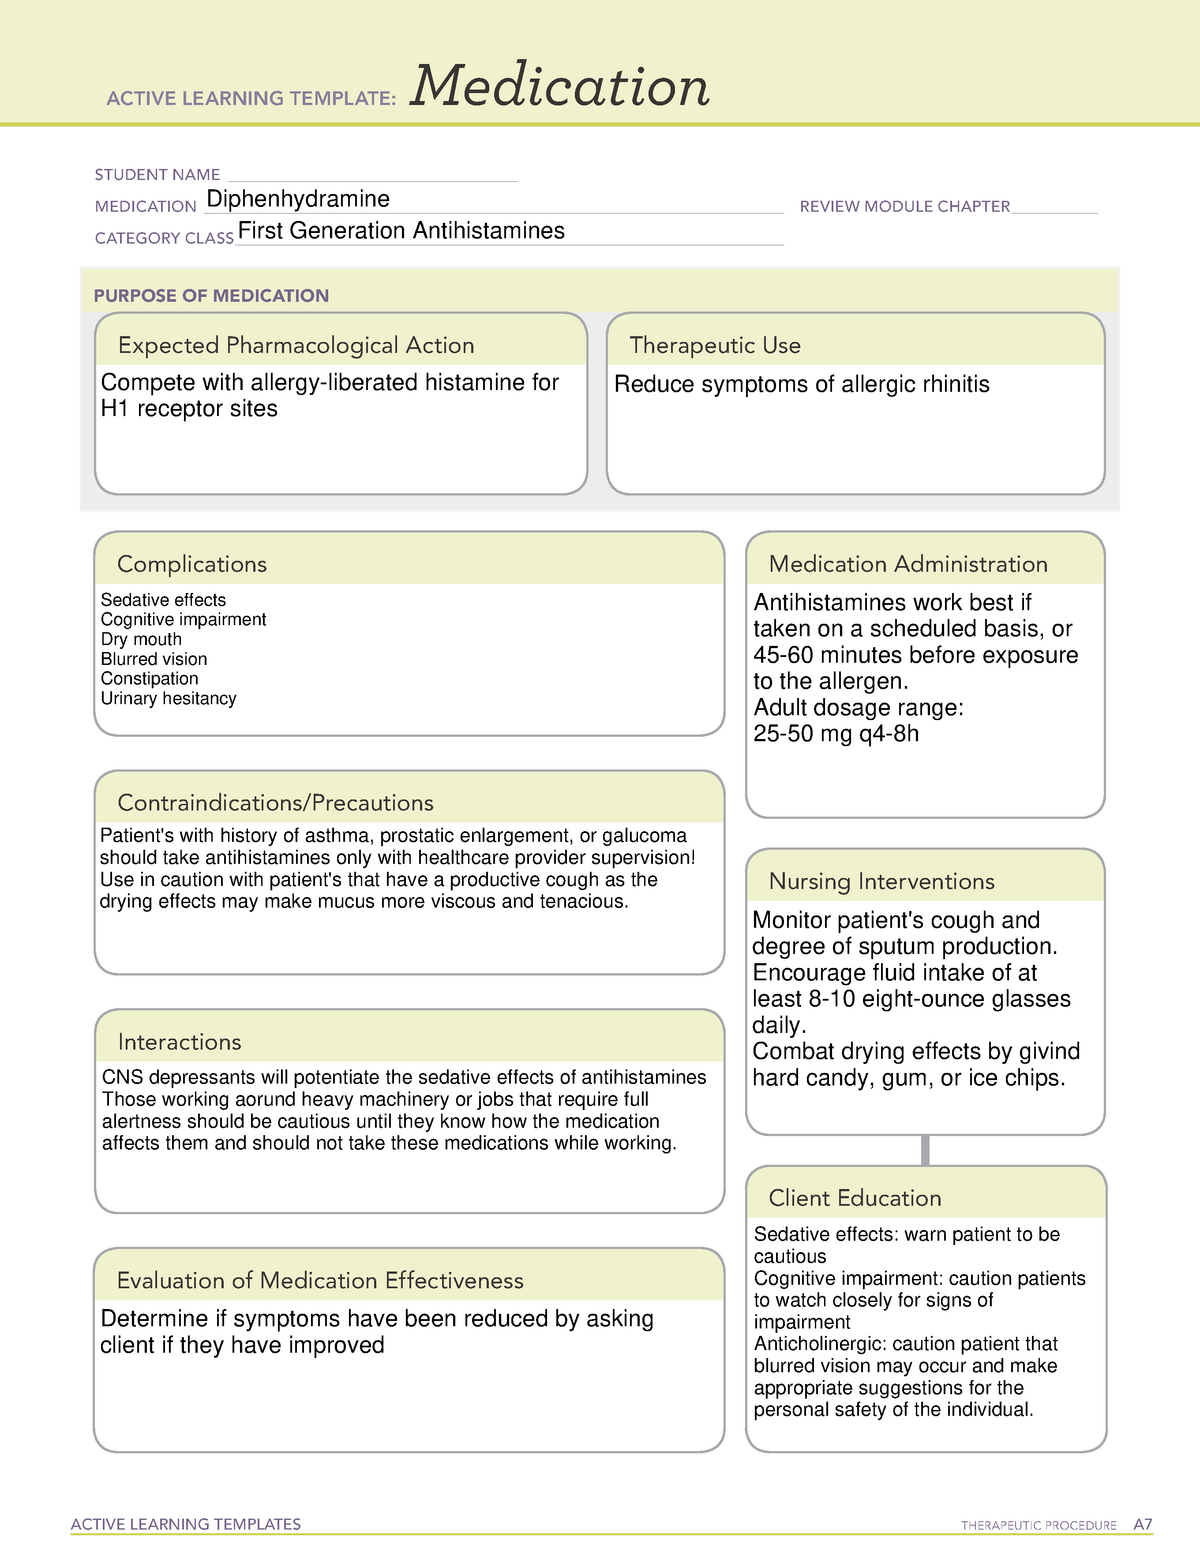 Active Learning Template medication Diphemhydramine 1120 medical